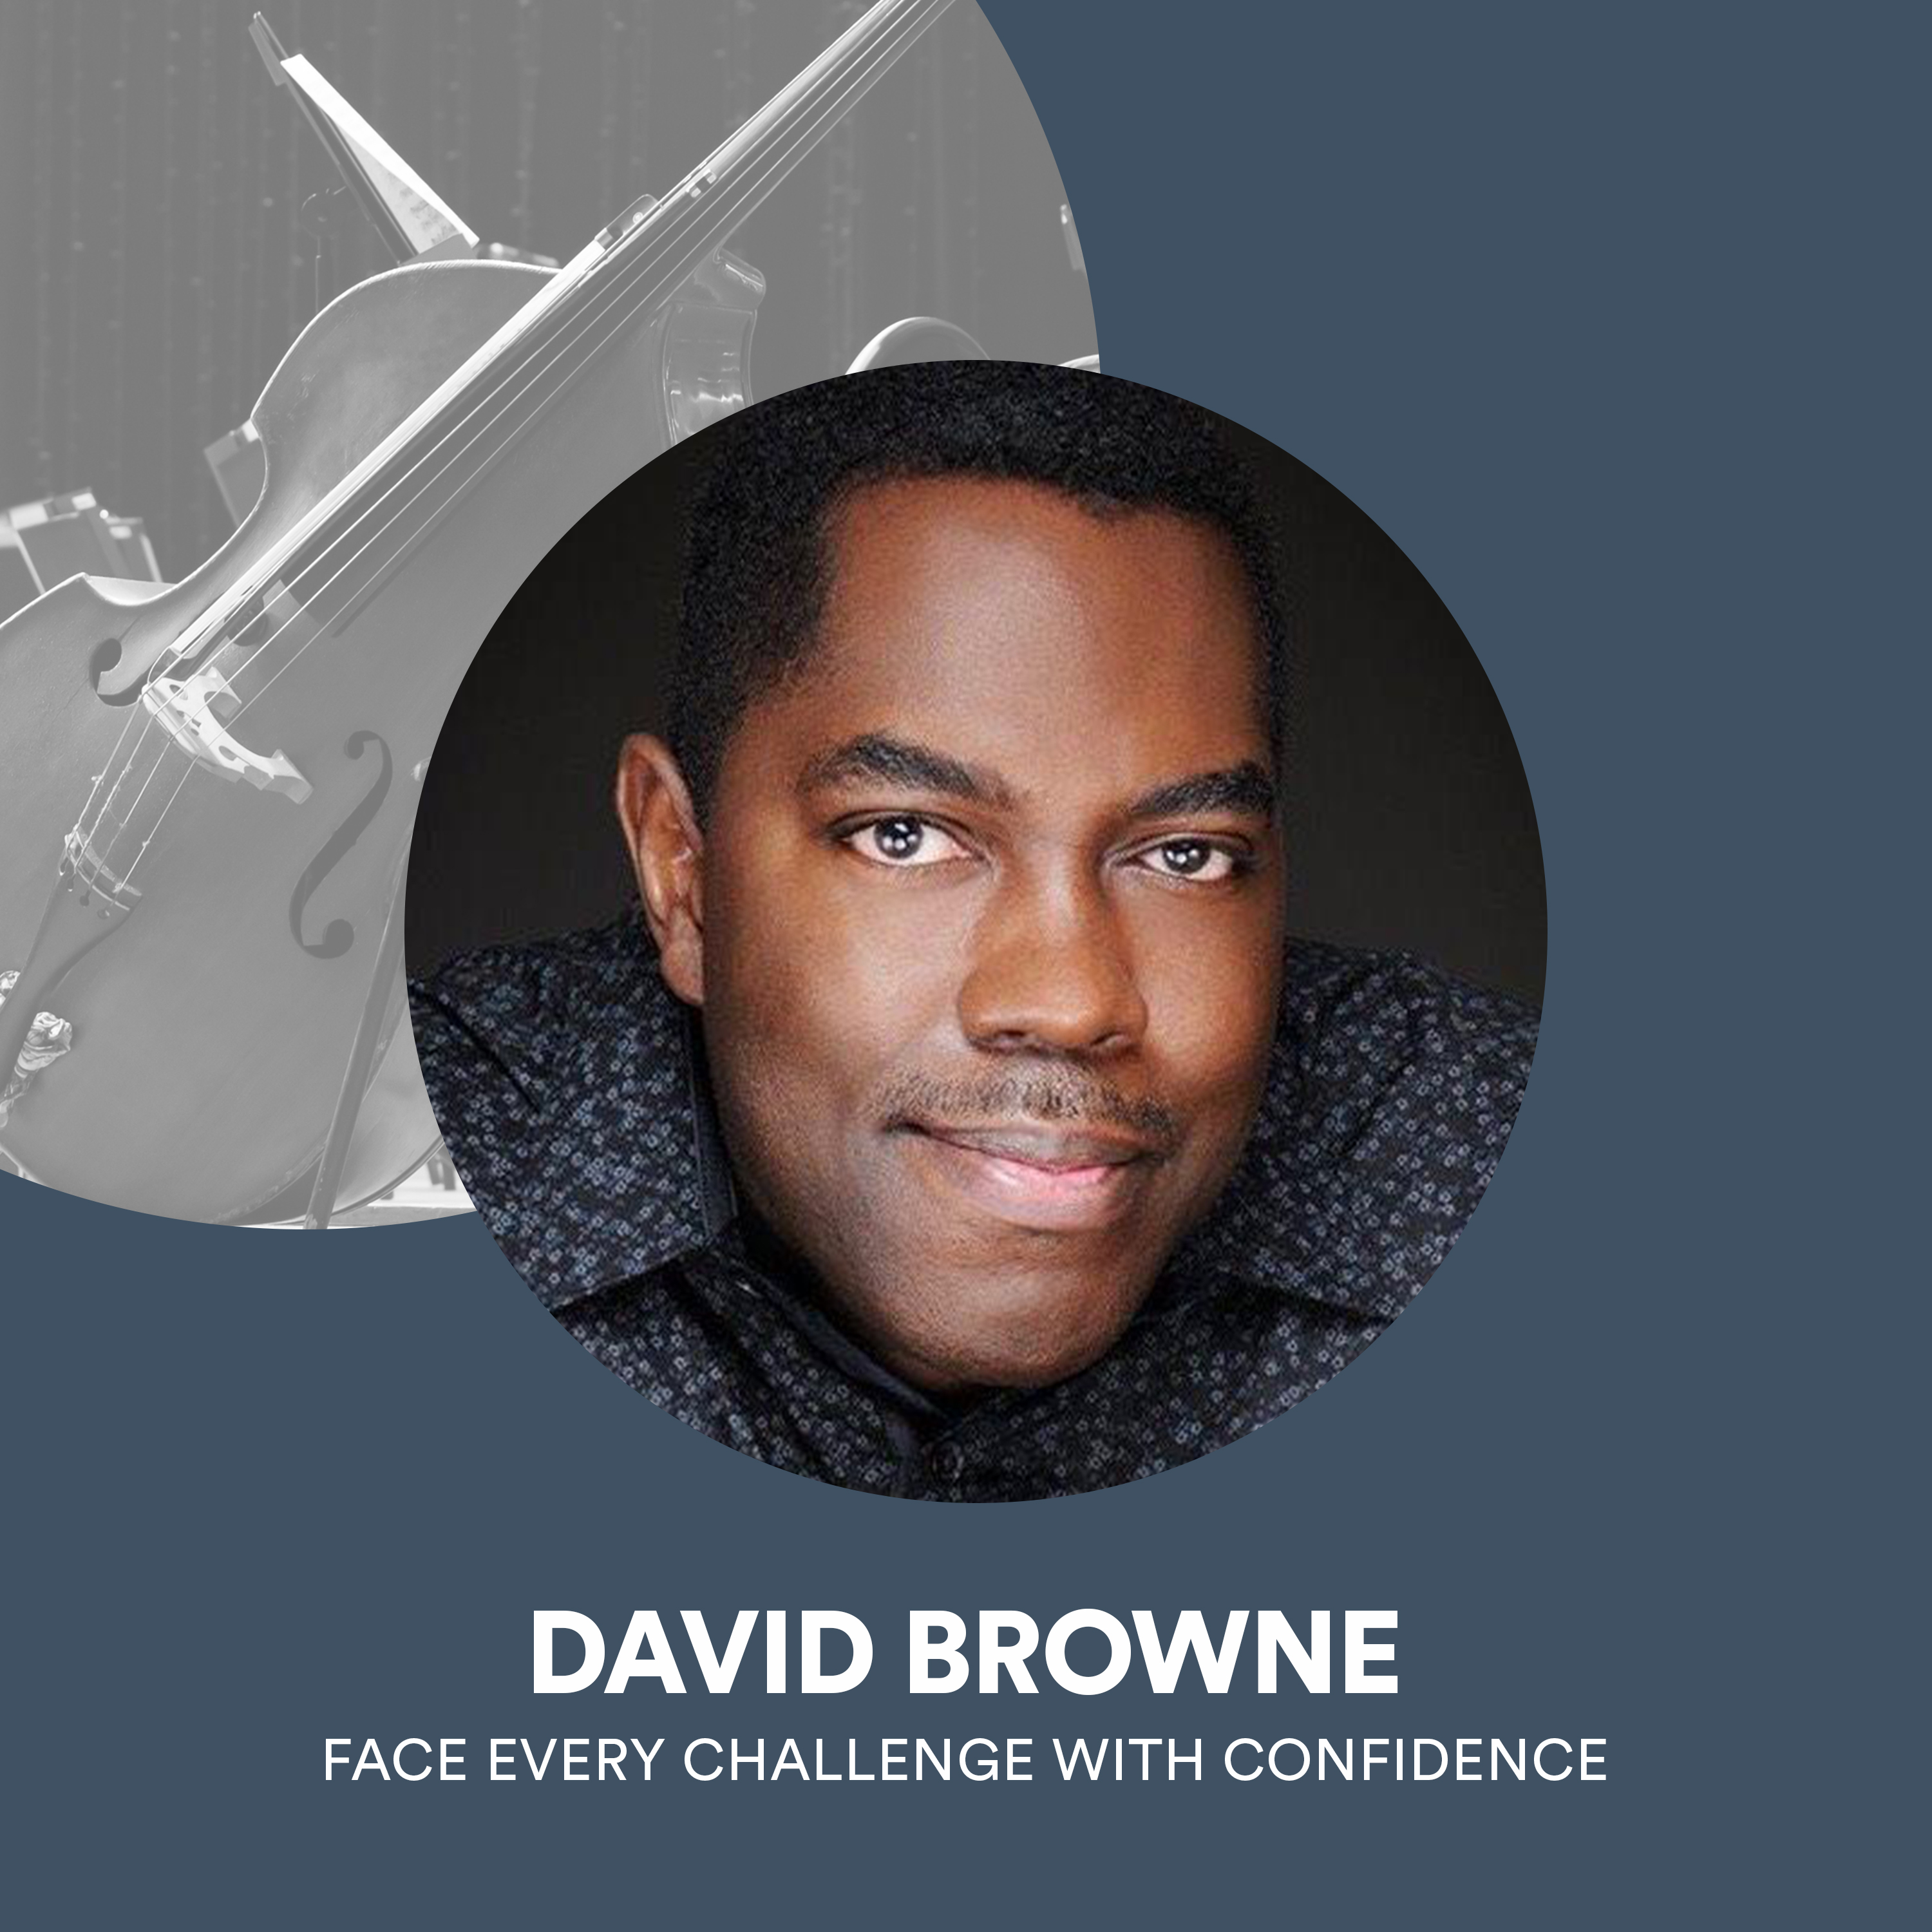 A Driving Inspiration to Face Every Challenge with Valor: Talented Classical Artist David Browne Stuns with New Single